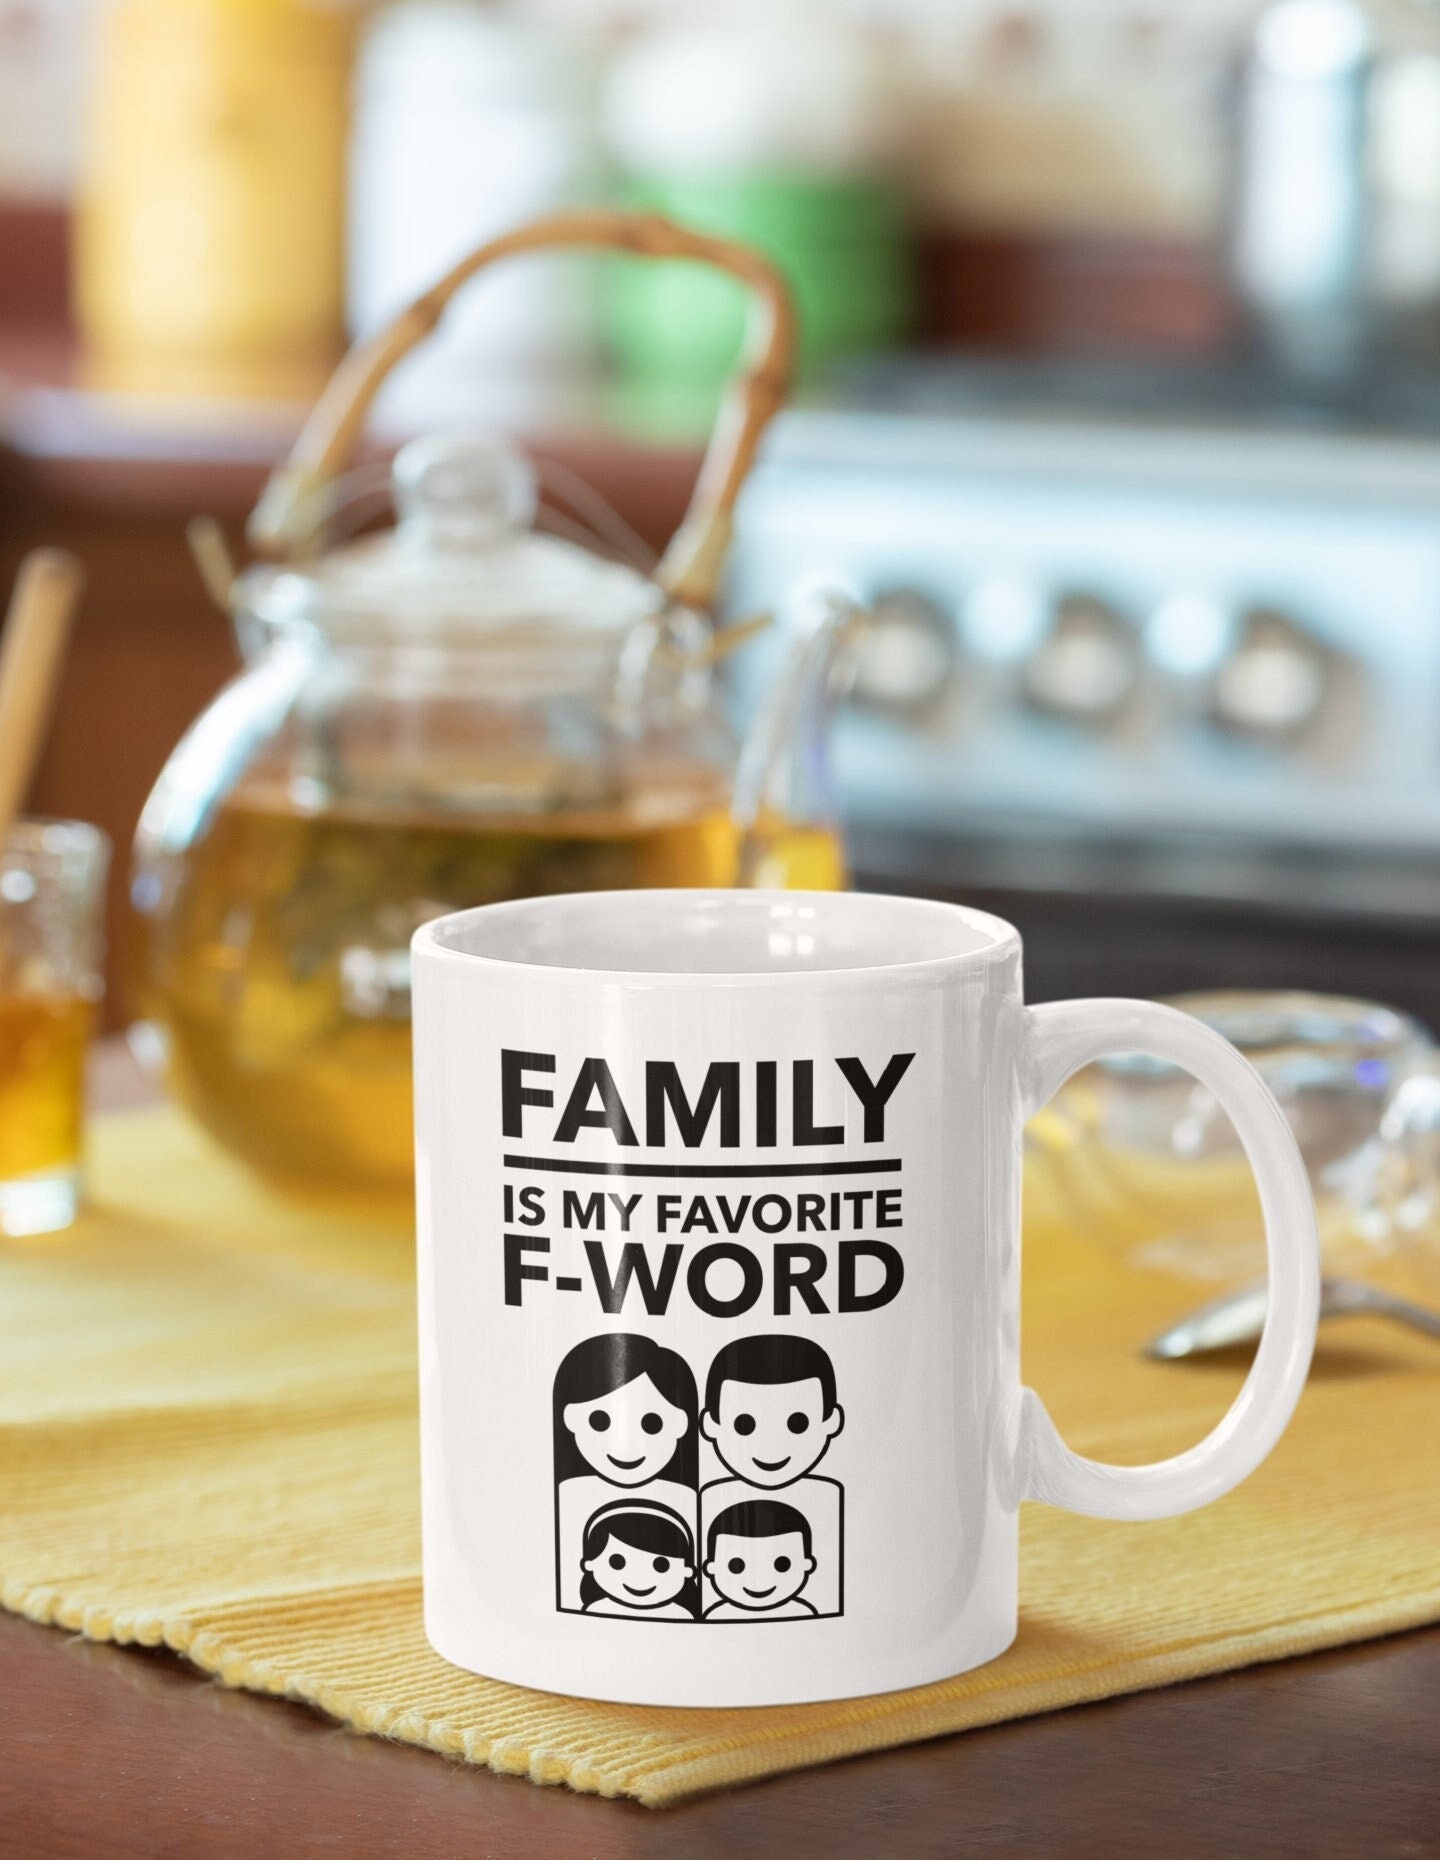 Family Mug Family Gifts Family F-word Cup F-word - Etsy